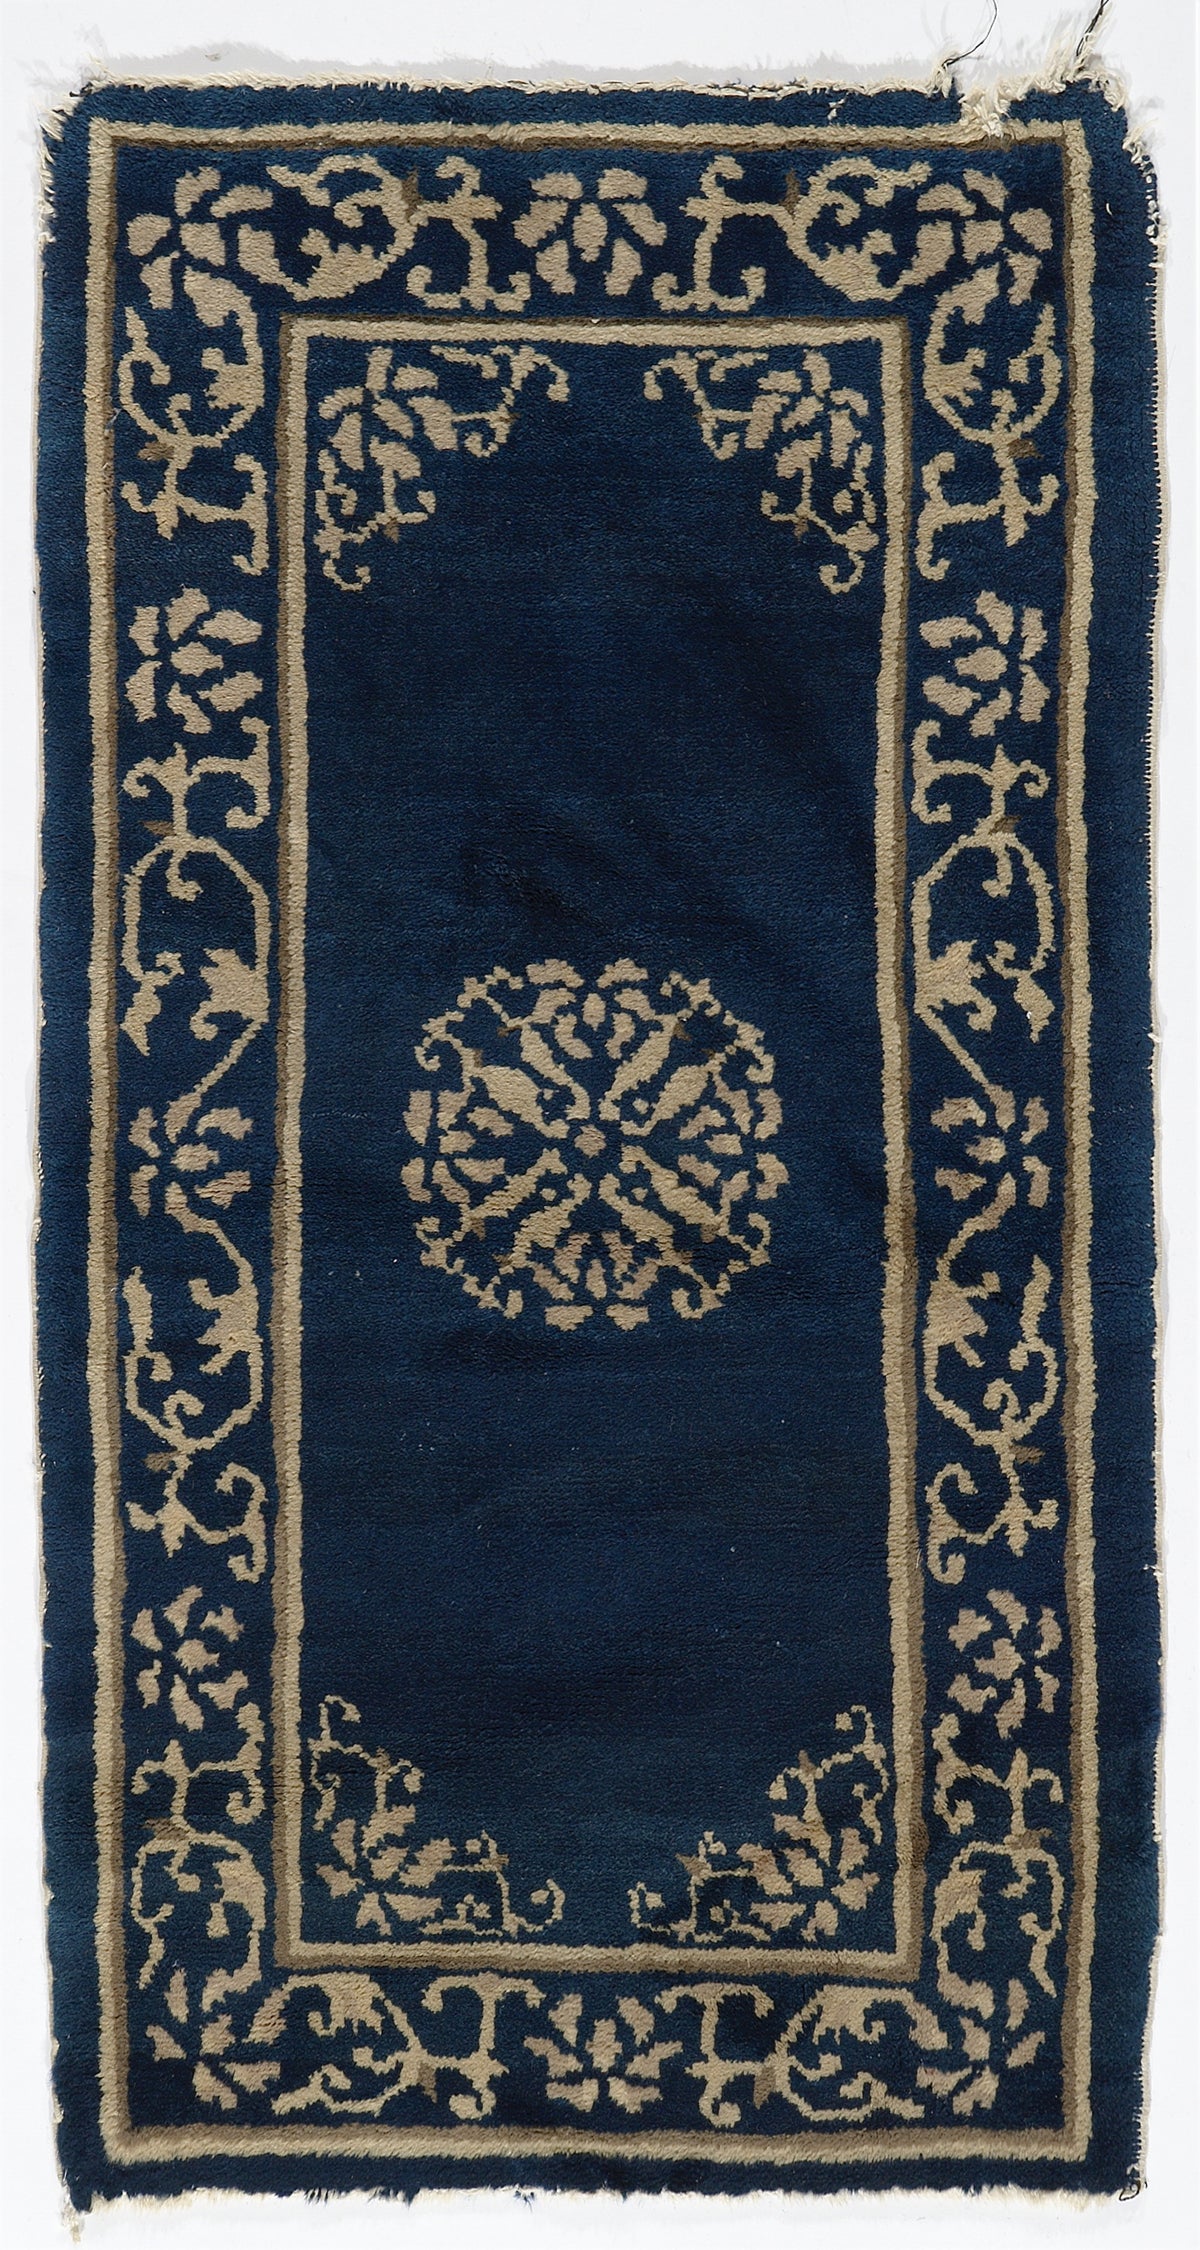 2'x4' Small Navy Blue Chinese Art Deco Wool Rug